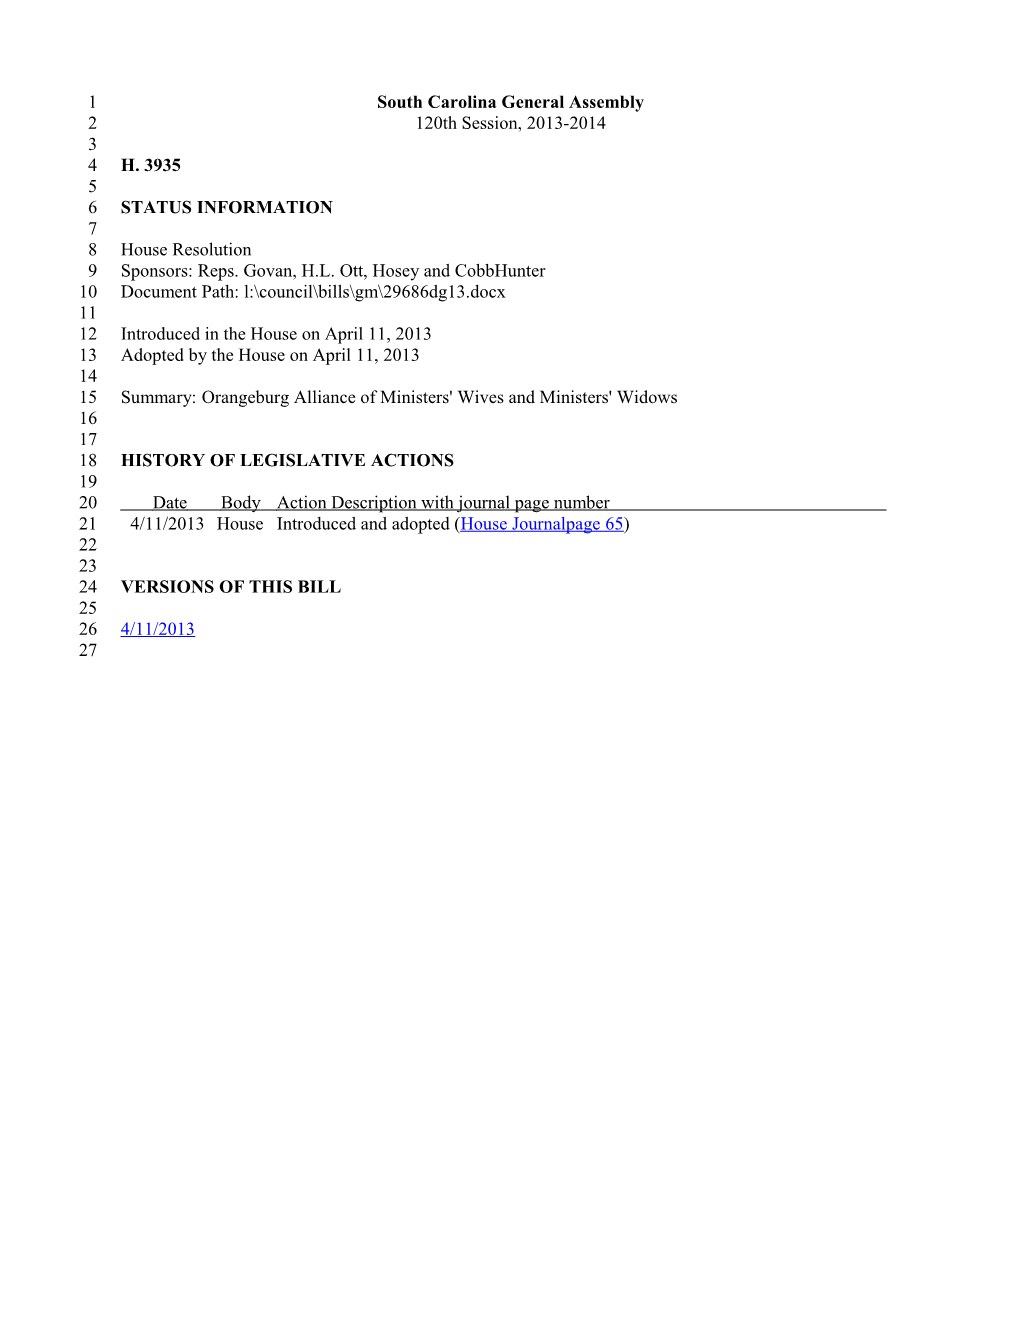 2013-2014 Bill 3935: Orangeburg Alliance of Ministers' Wives and Ministers' Widows - South